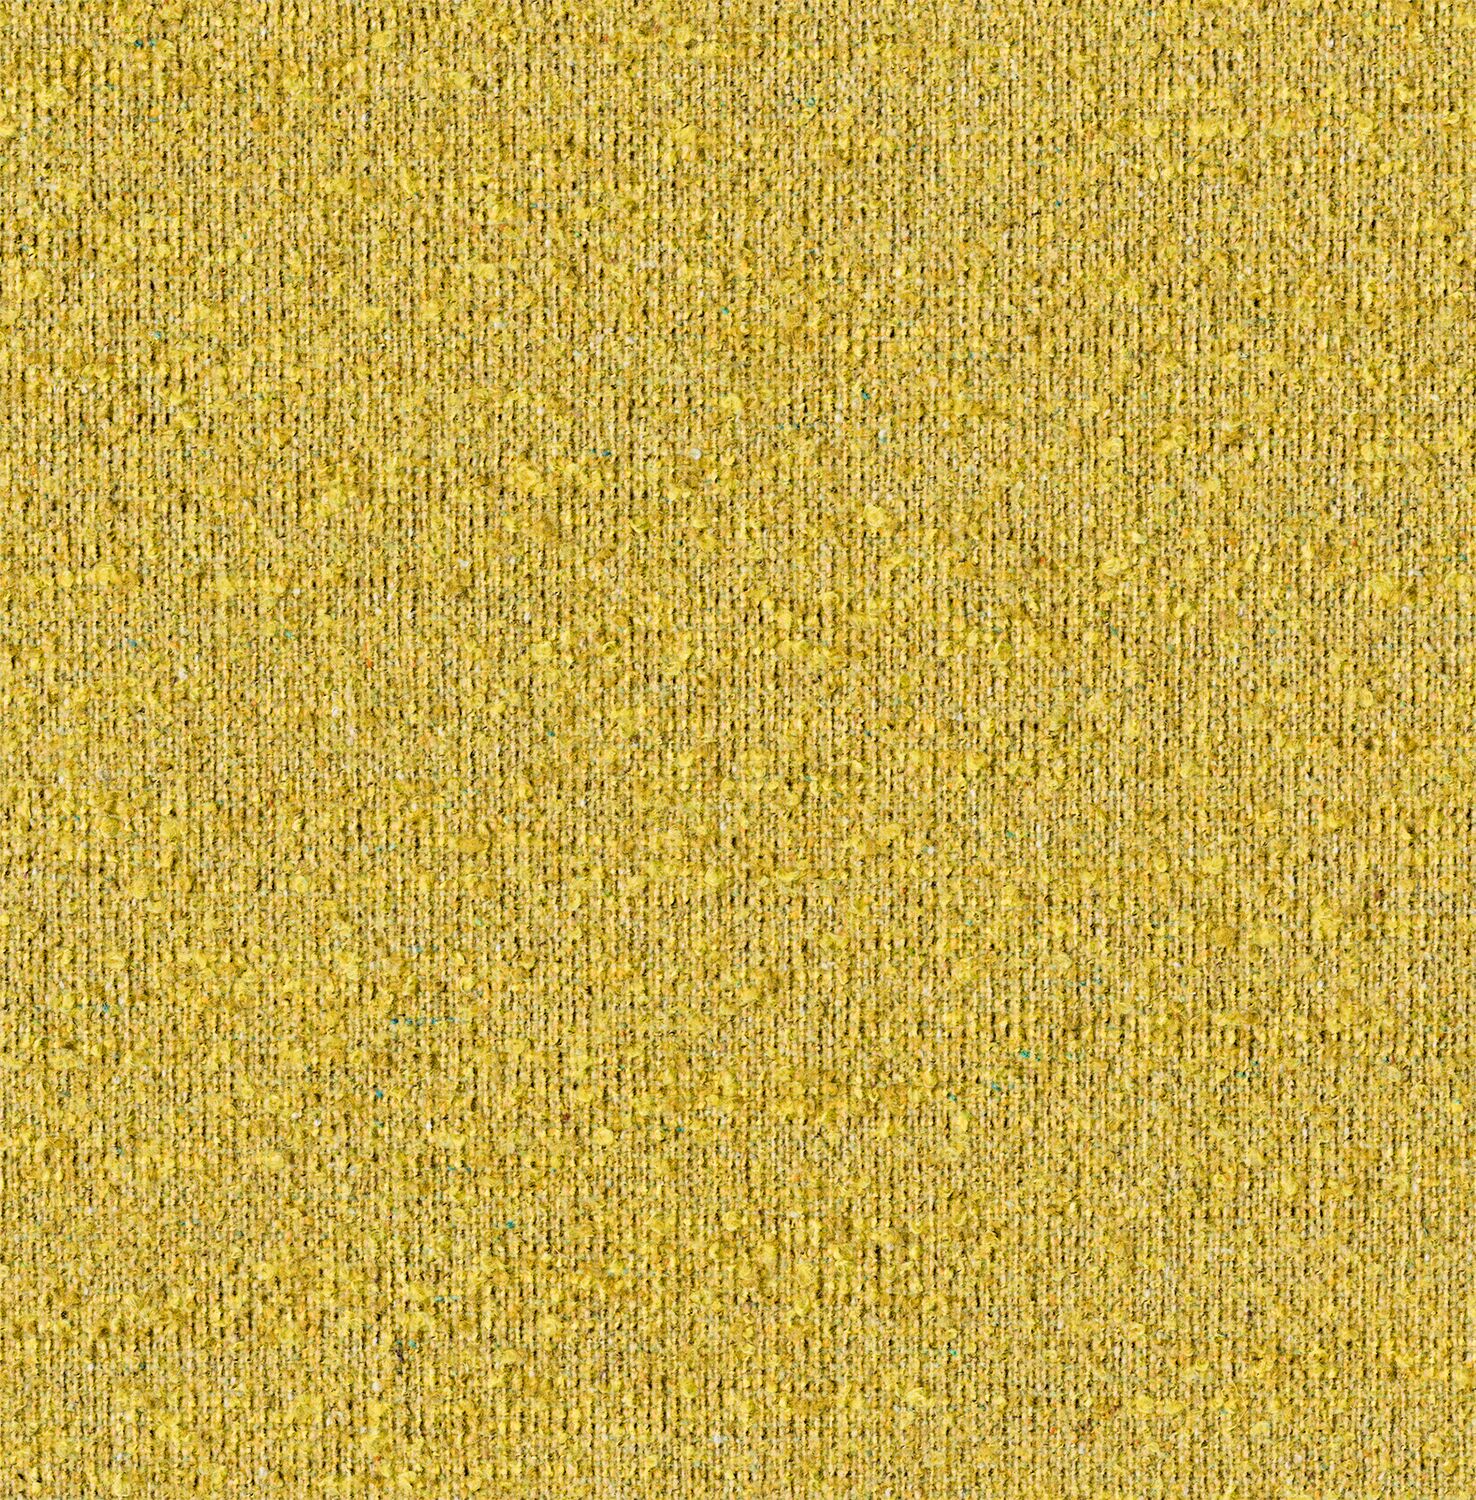 Everyday Boucle - Yarrow - 4111 - 17 - Half Yard Tileable Swatches